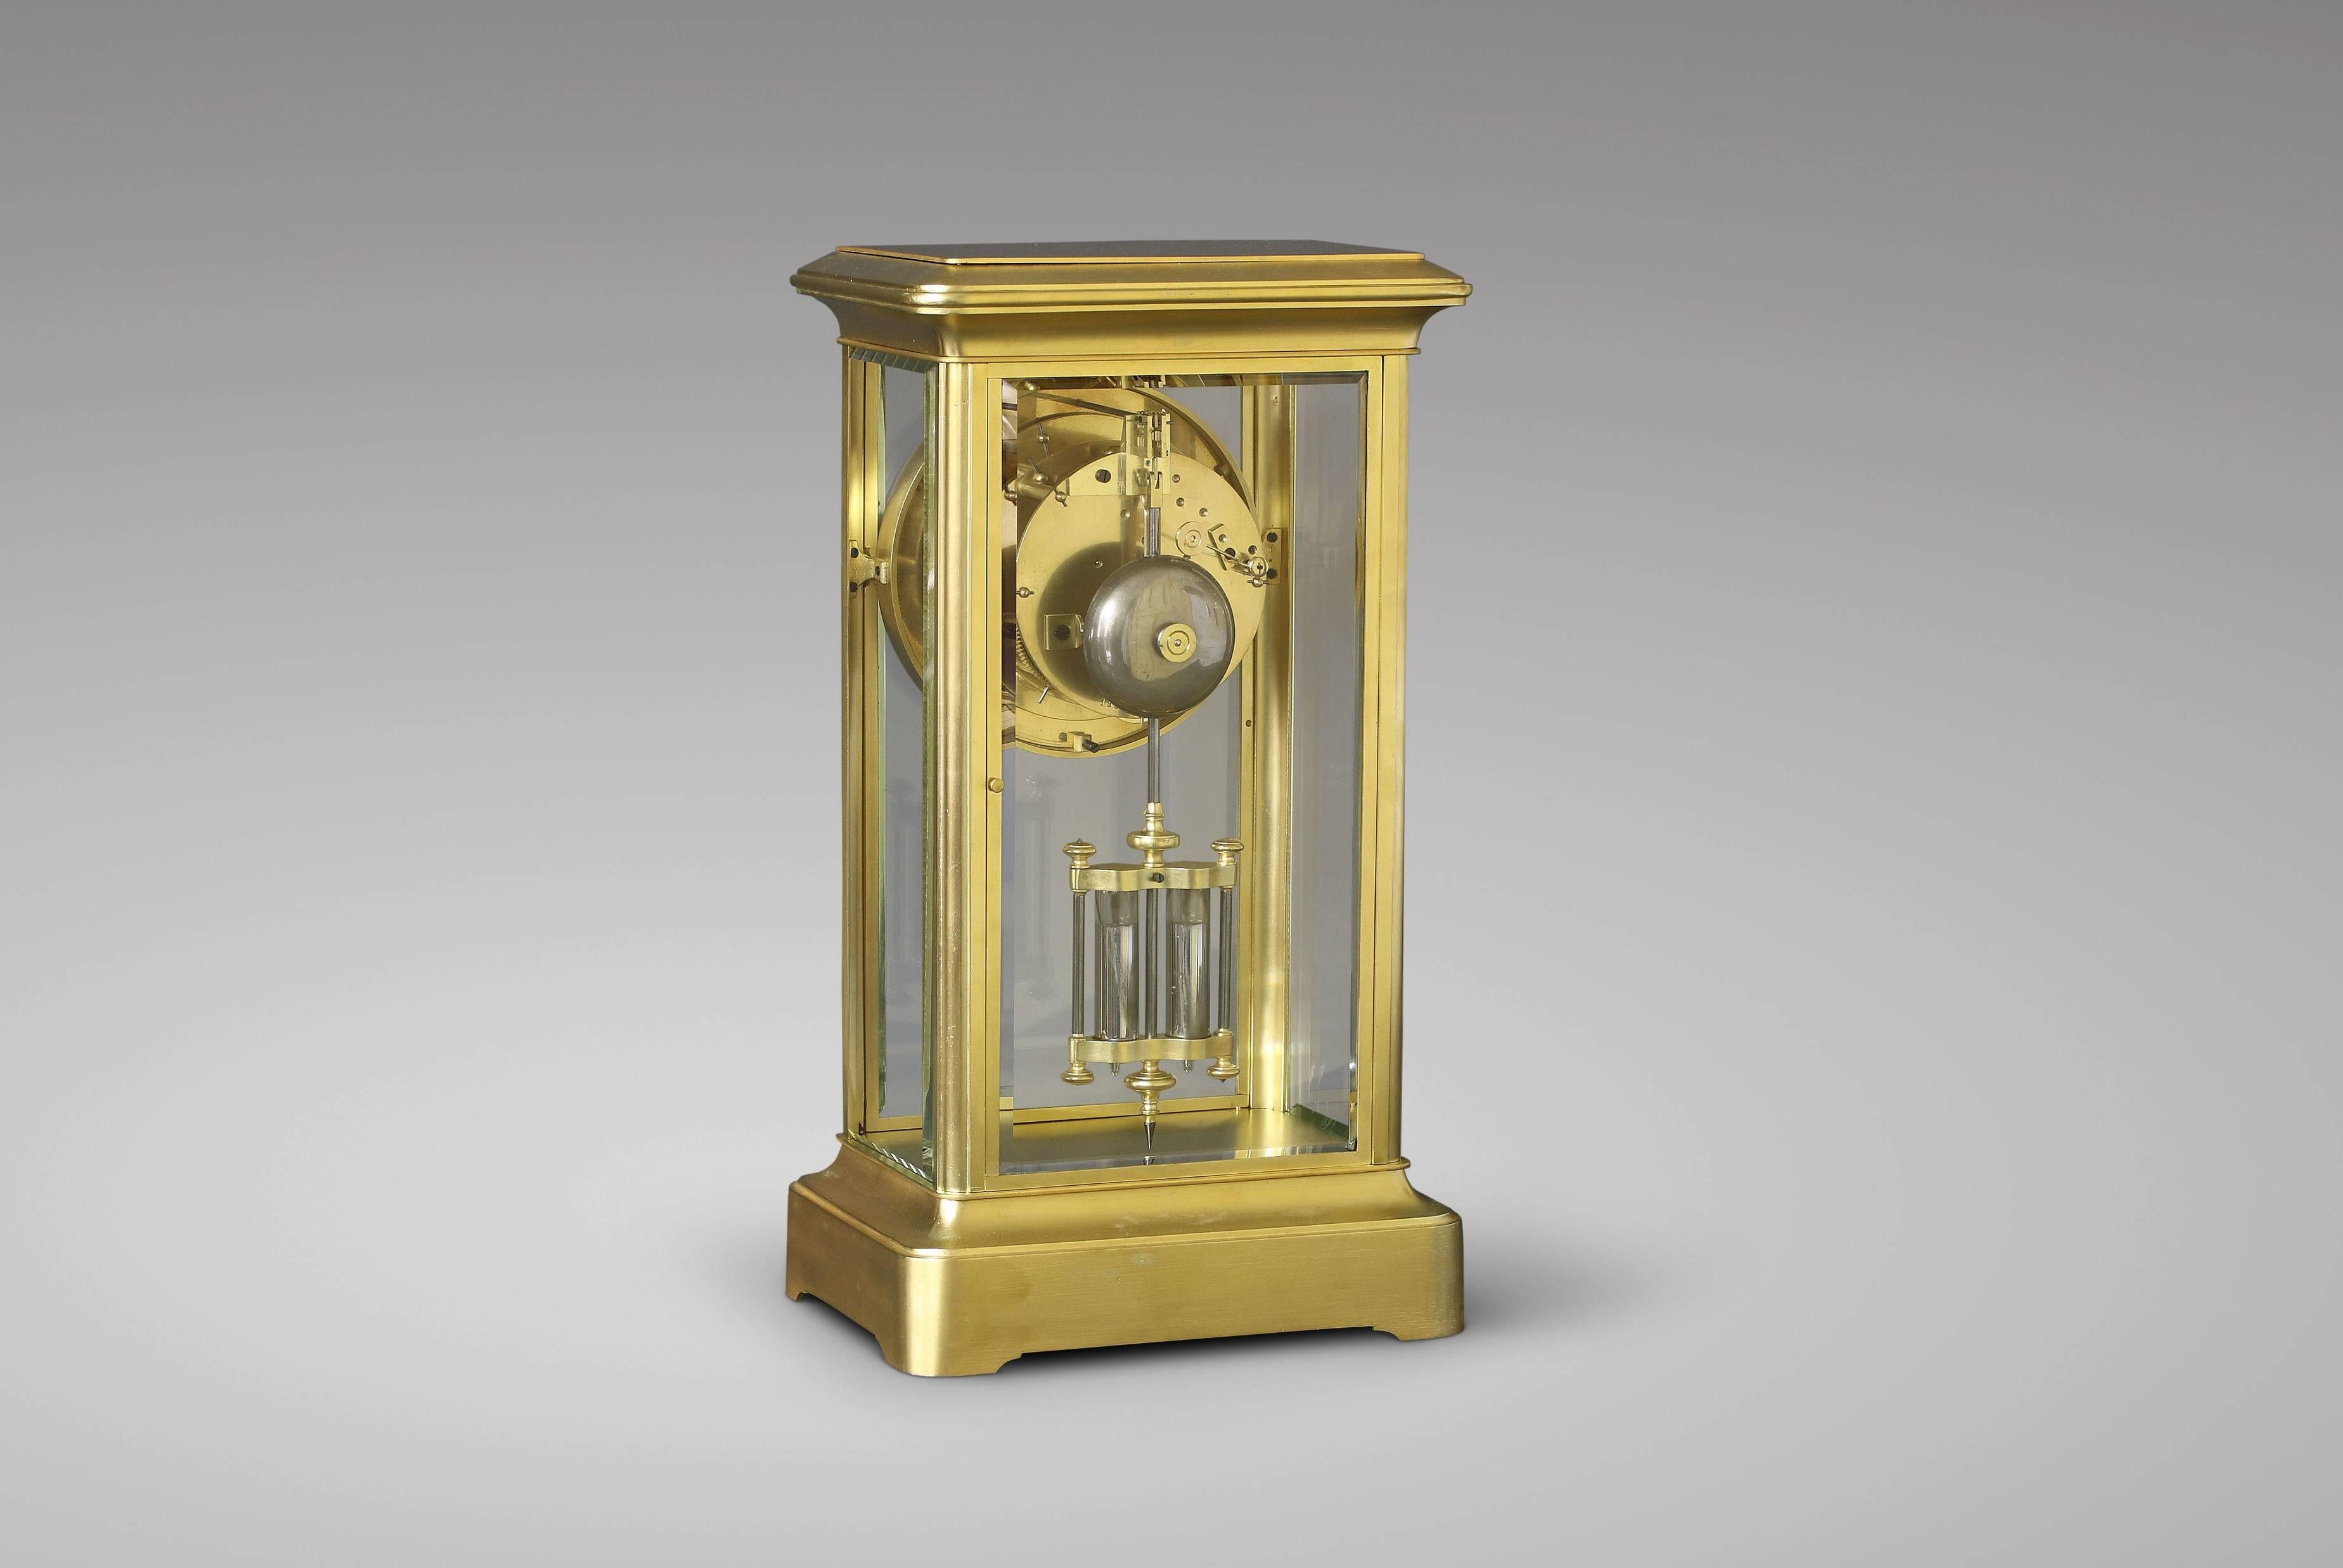 Late 19th Century French Astronomical Table Regulator, 19th Century